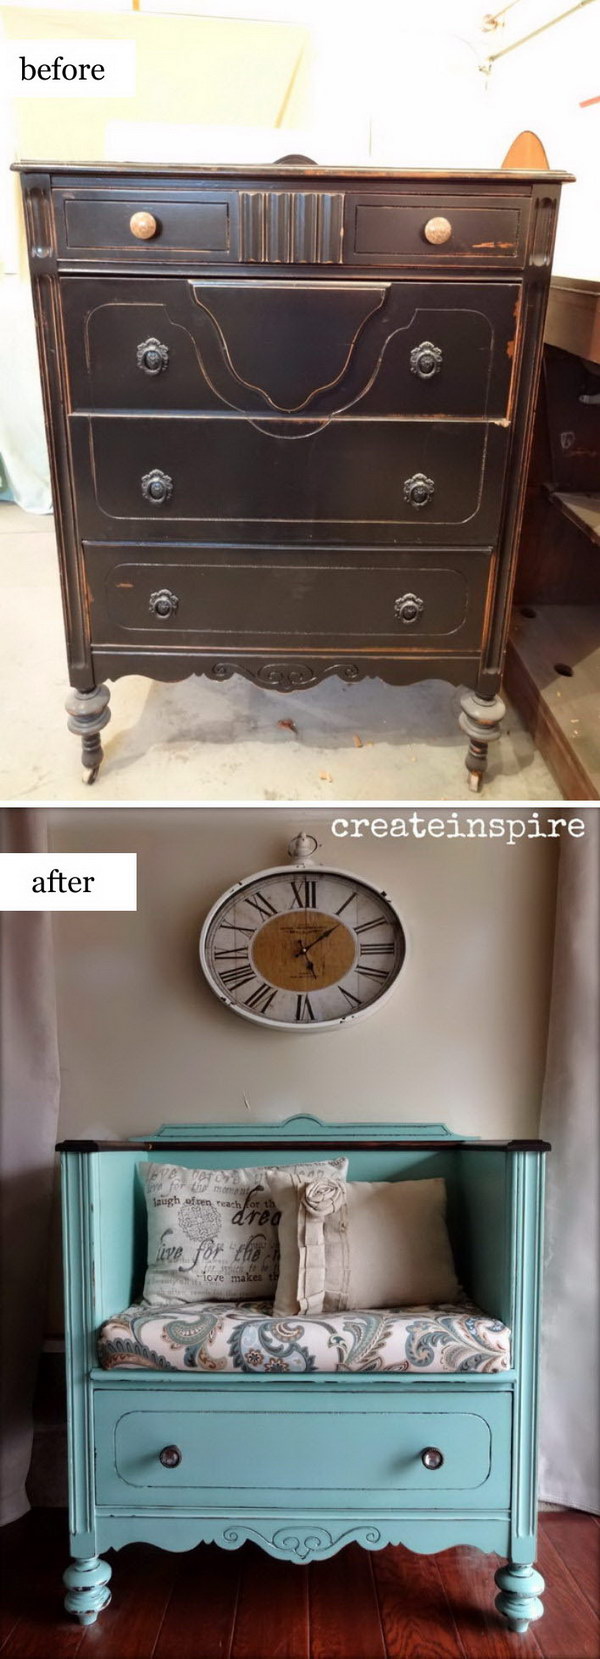 DIY bench from an old chest of drawers. 